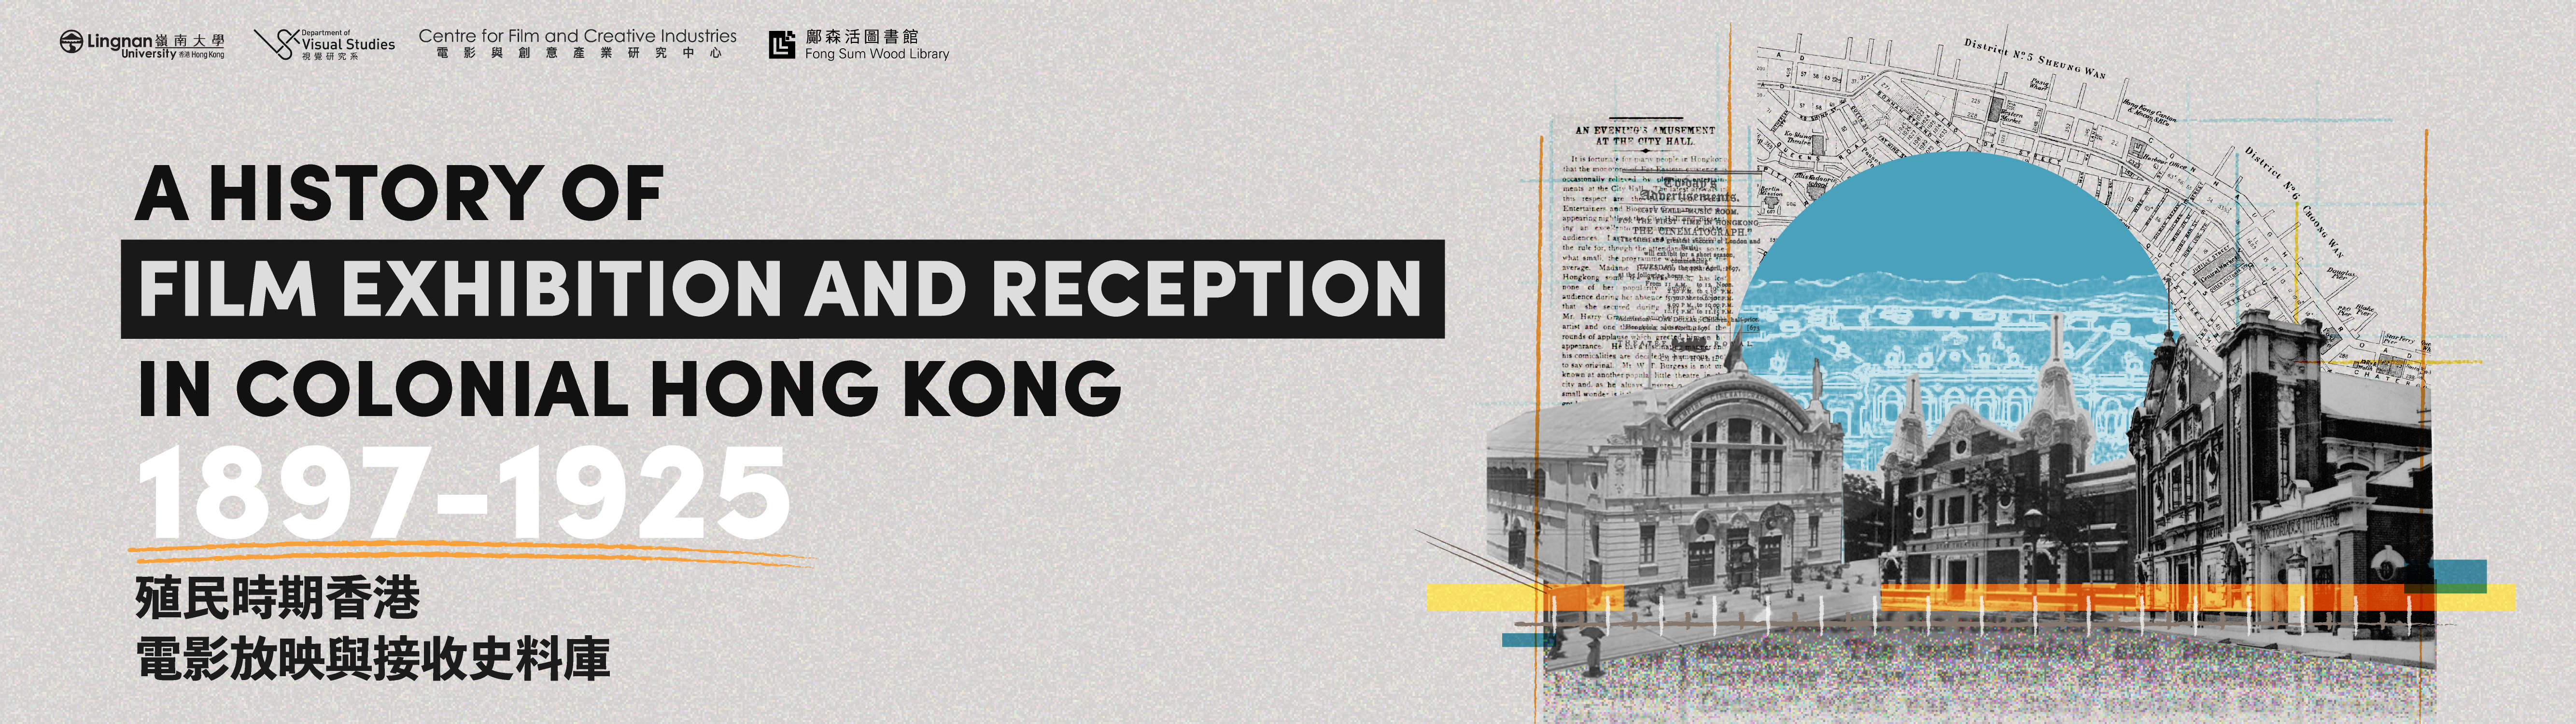 A History of Film Exhibition and Reception in Colonial Hong Kong: 1897 to 1925